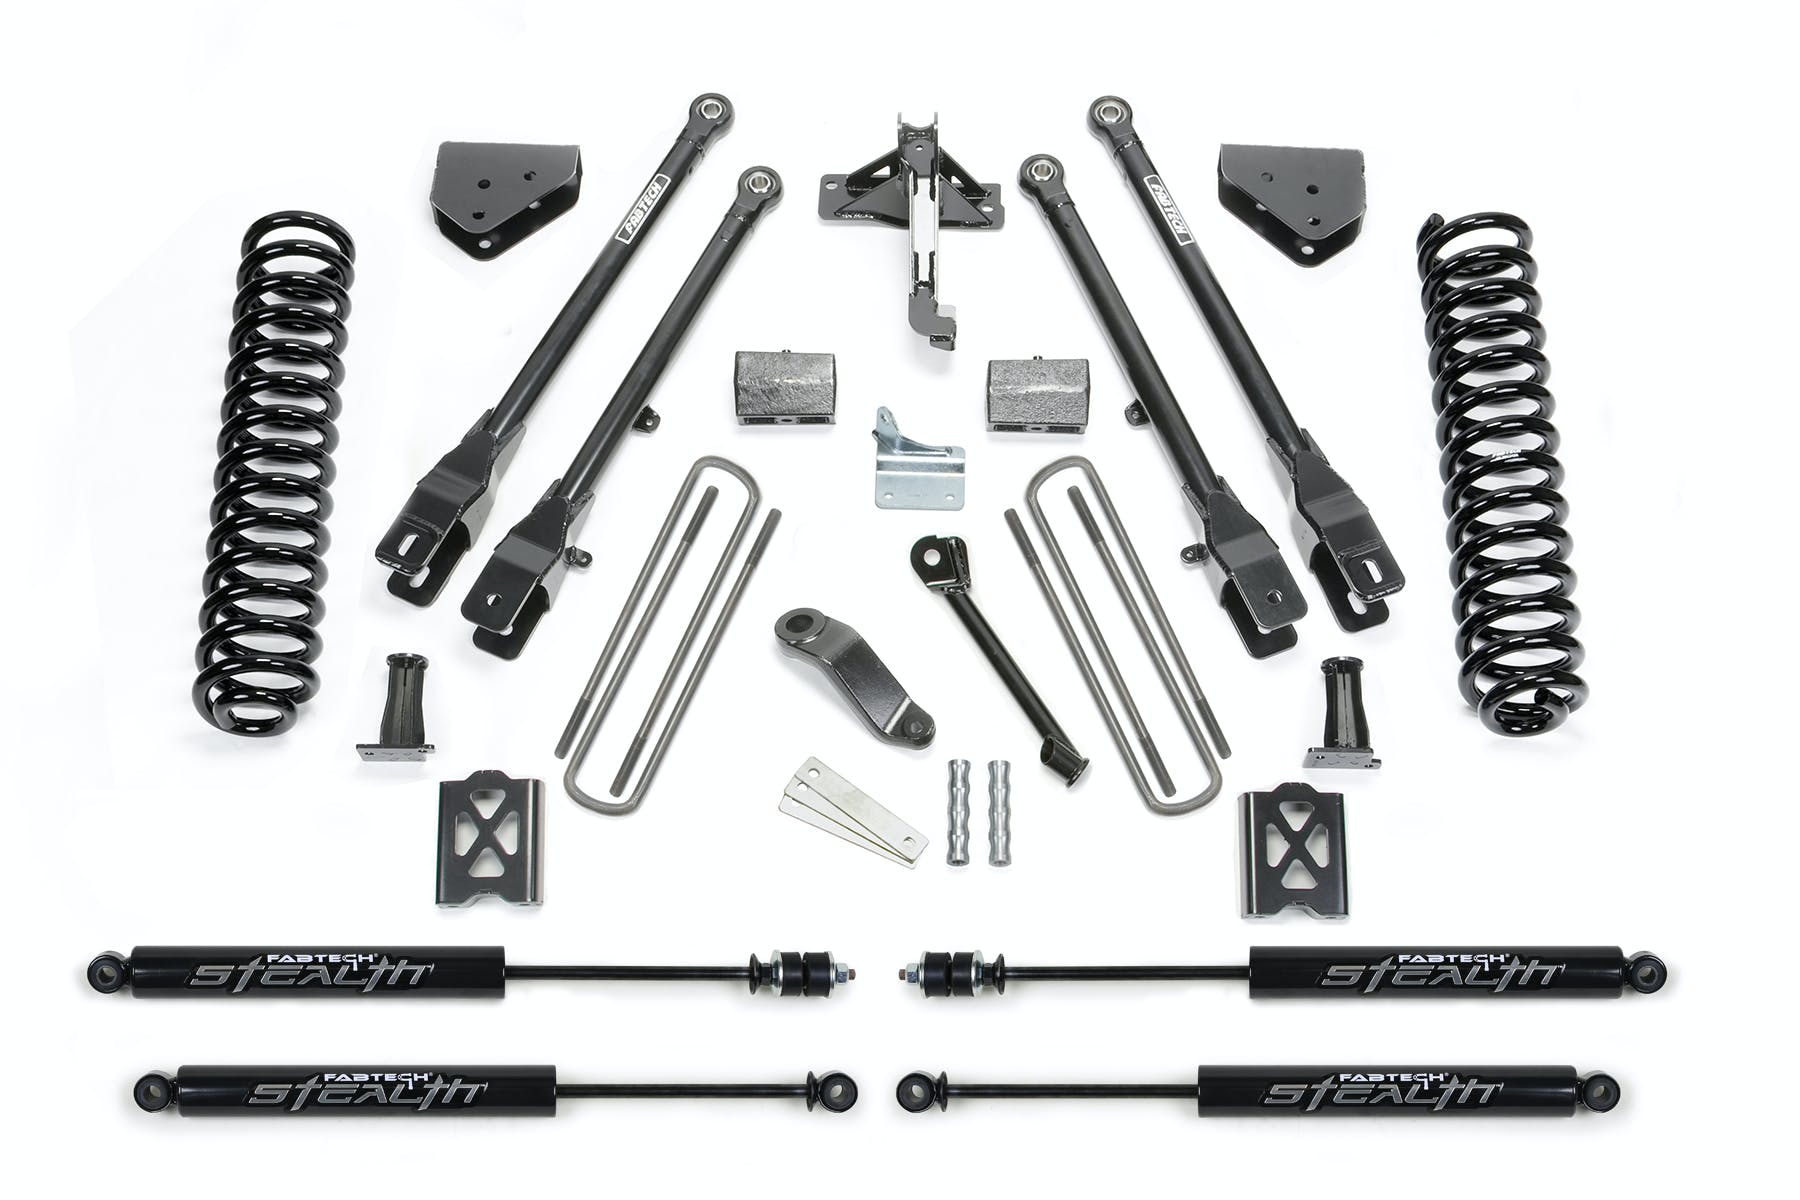 Fabtech K20131M 6in. 4LINK SYS W/COILS/STEALTH 05-07 FORD F250 4WD W/FACTORY OVERLOAD